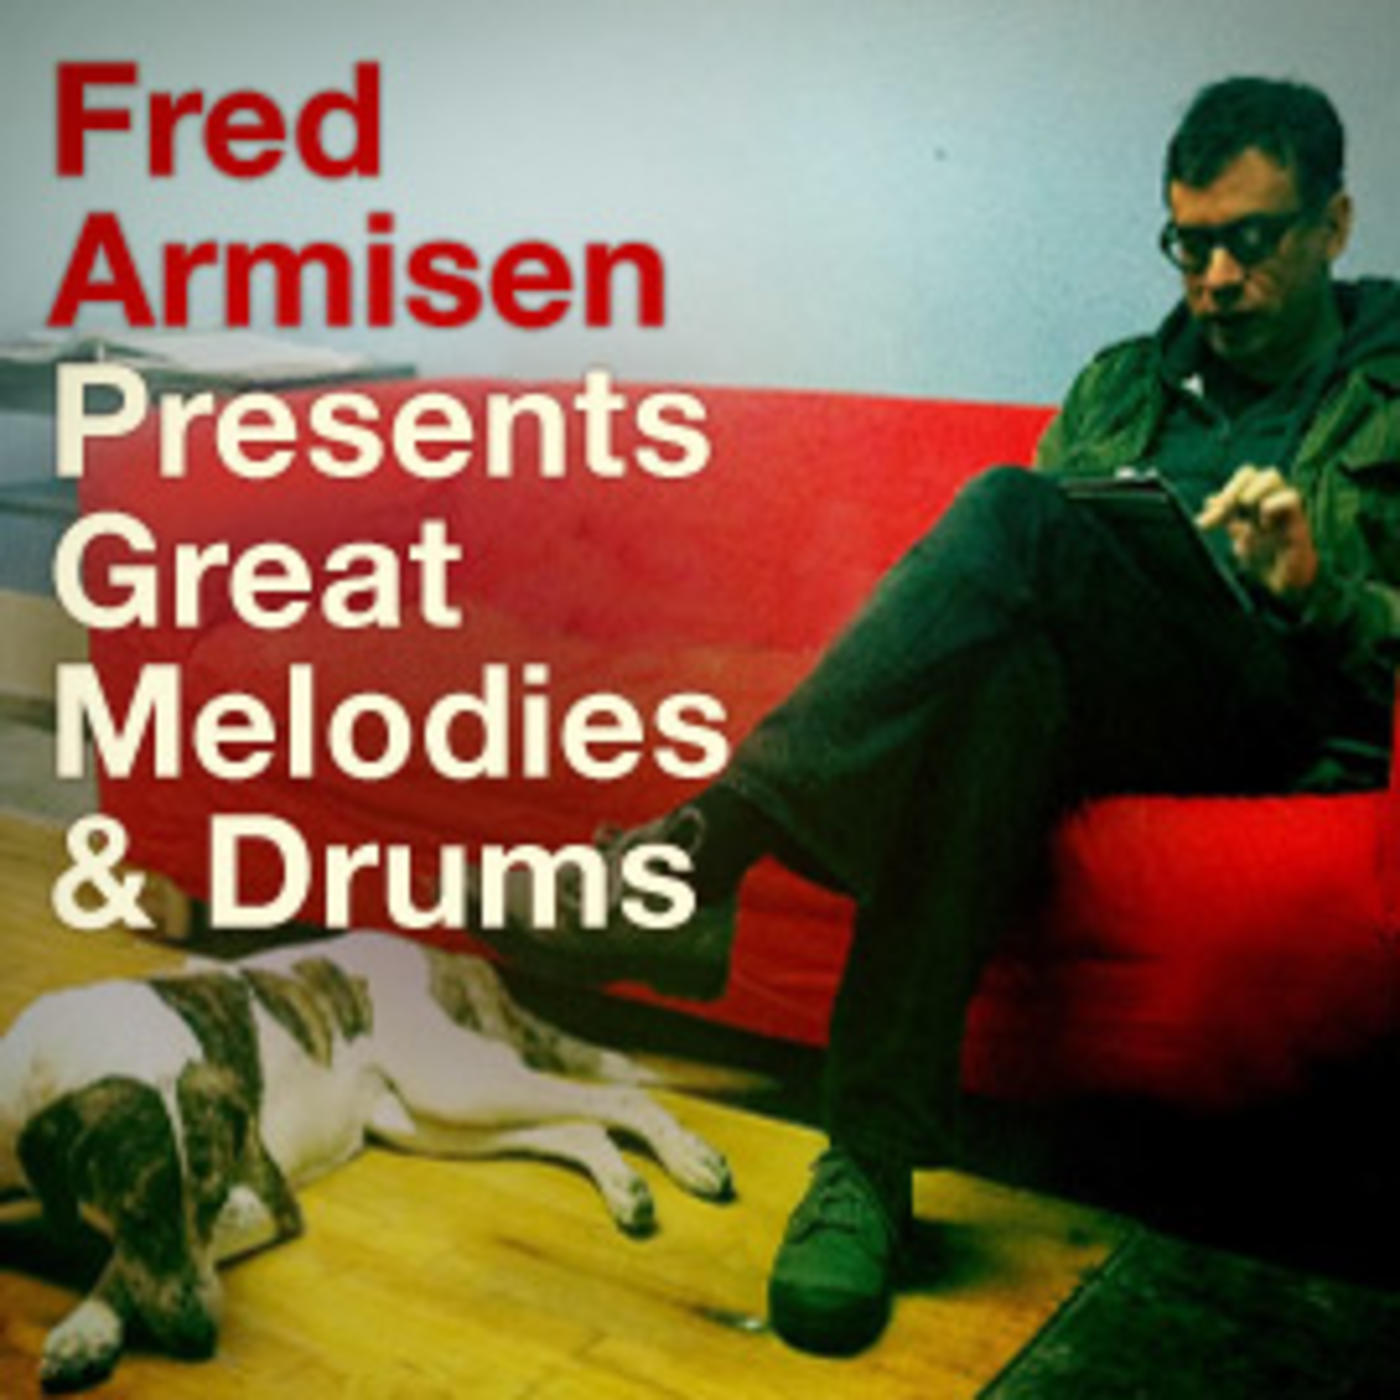 Fred Armisen Presents Beautiful Basslines - Bow Wow Wow, fIREHOSE, Sly & The Family Stone, The Who, Prince, Sebadoh, Yes, Tegan and Sara, The Stranglers, Jackson 5, Talking Heads